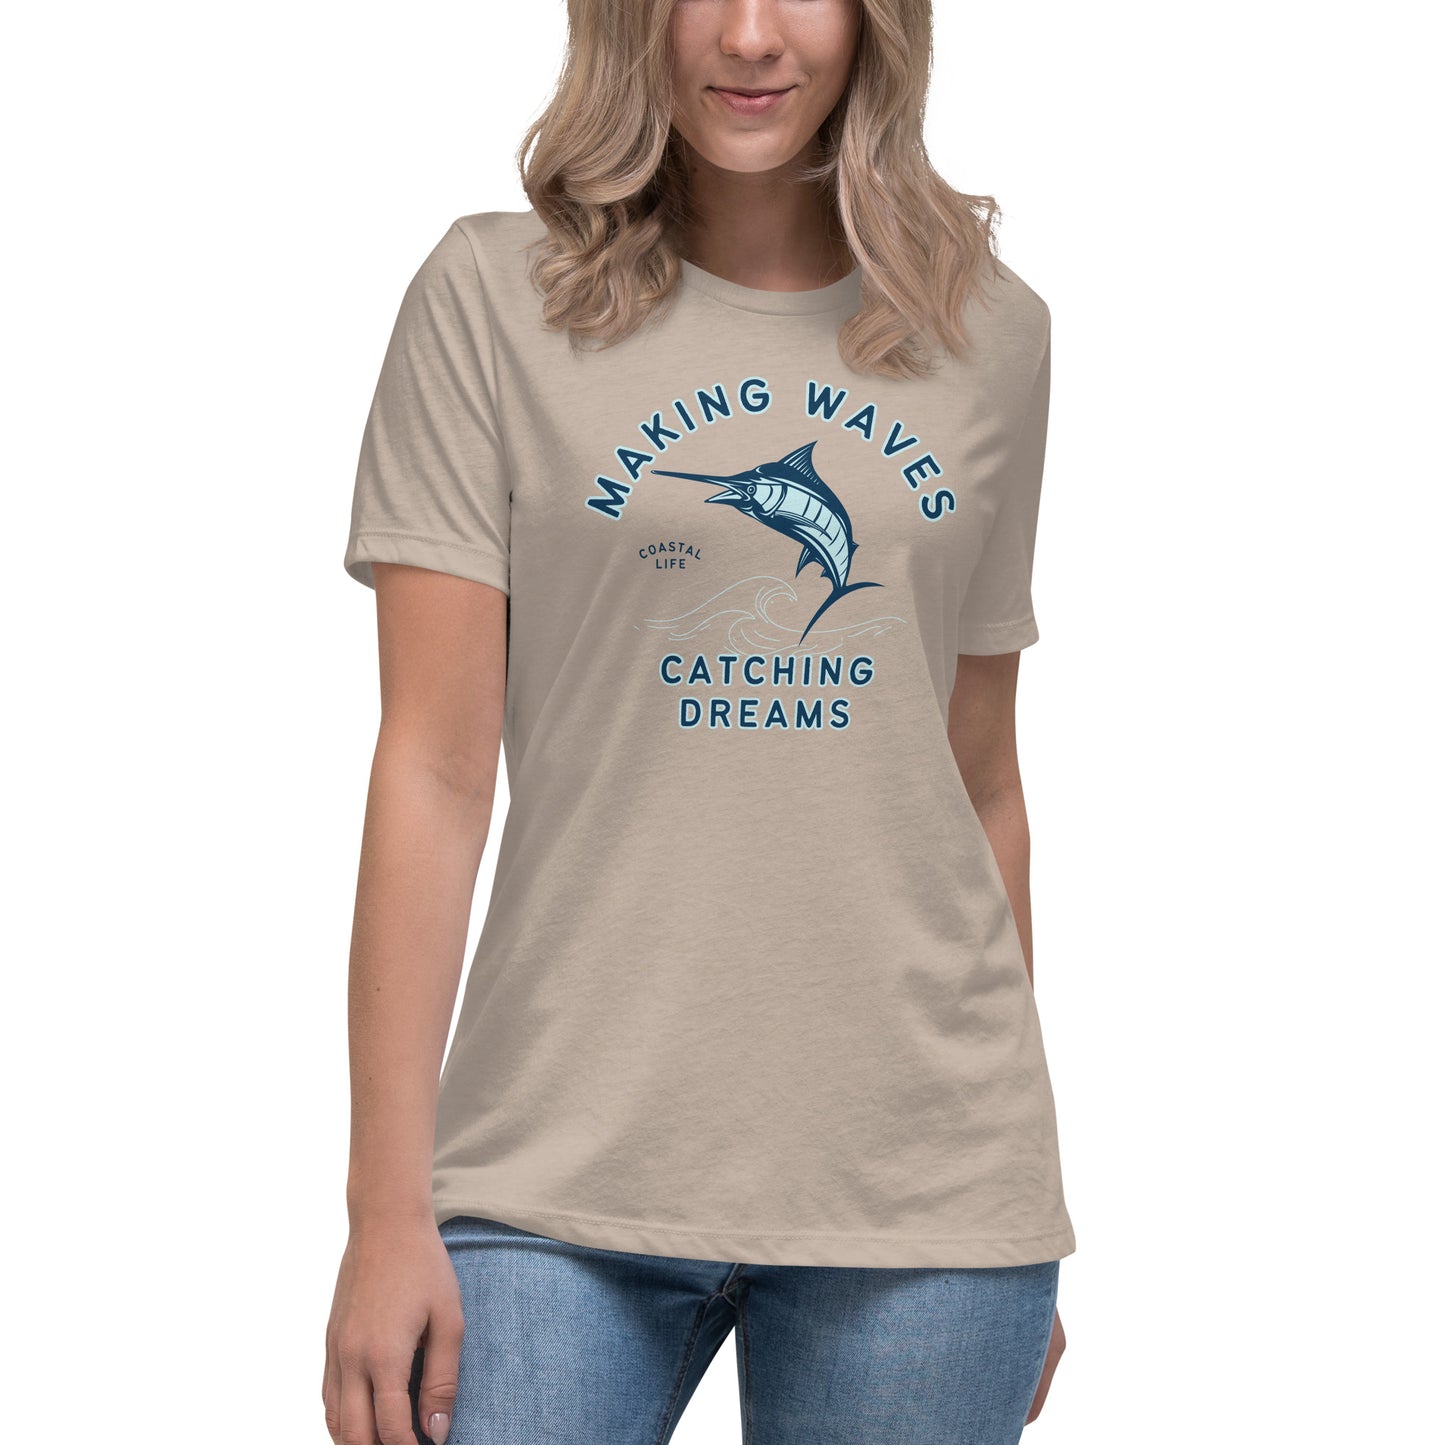 Making Waves Catching Dreams Women's Relaxed T-Shirt